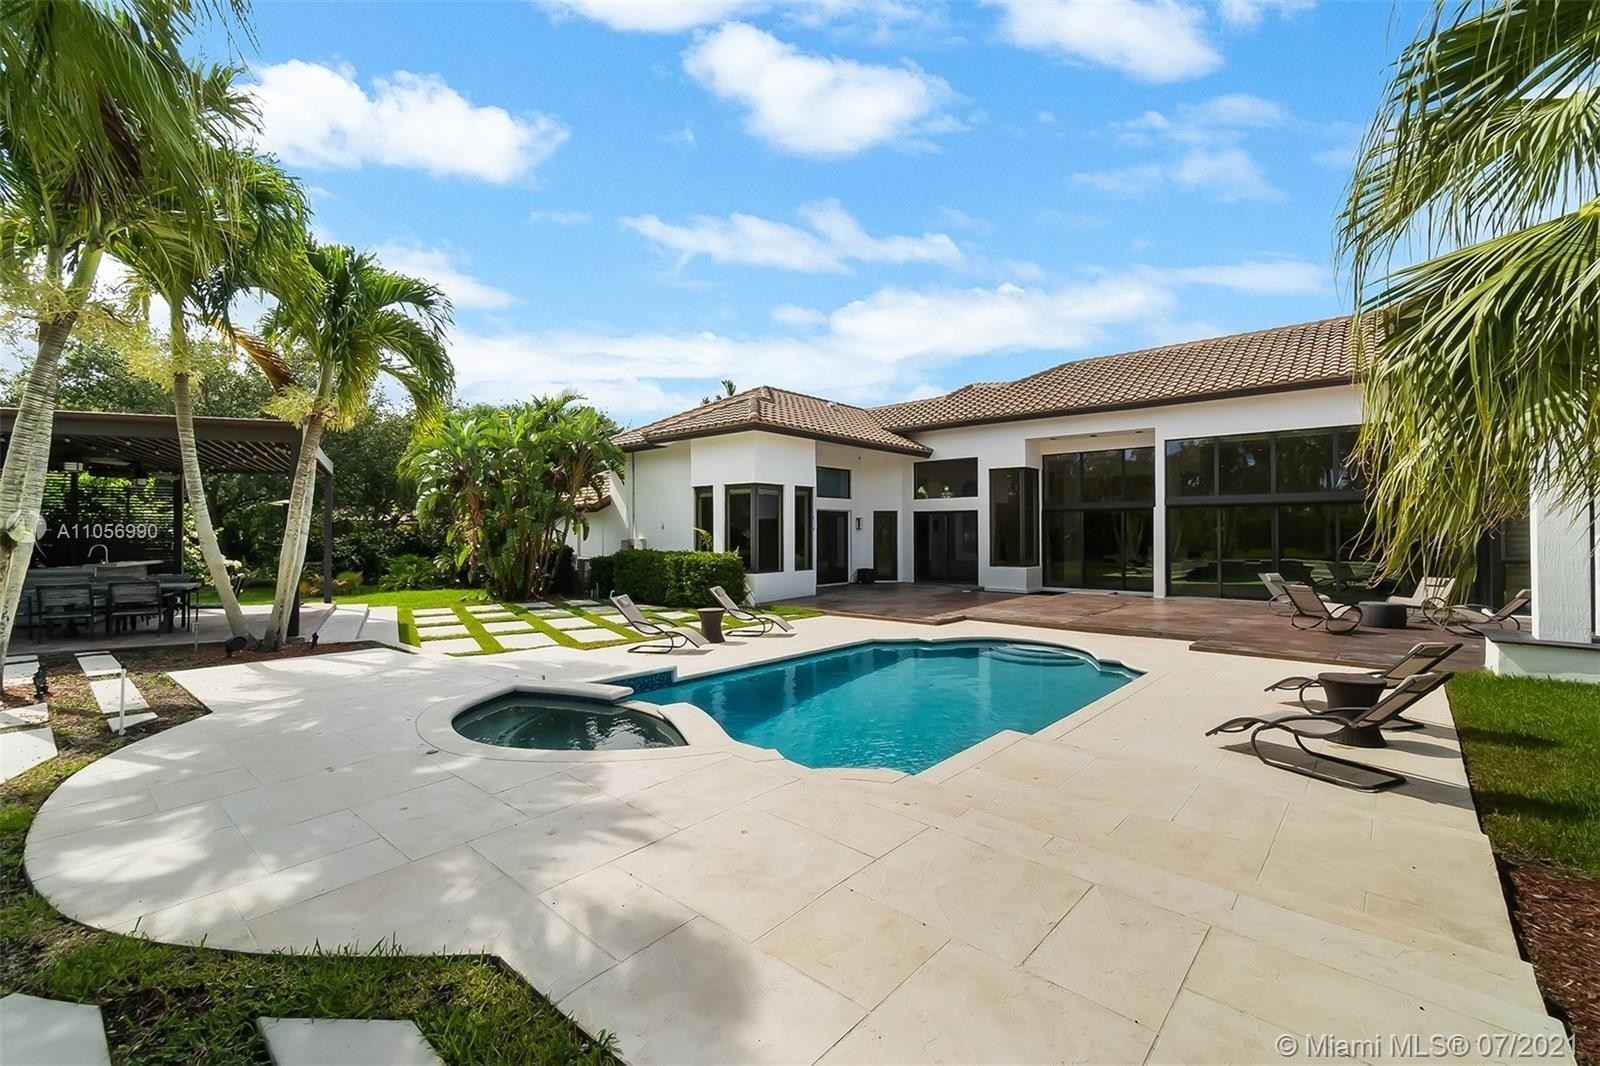 36. Single Family Homes for Sale at Windmill Ranch Estates, Weston, FL 33331